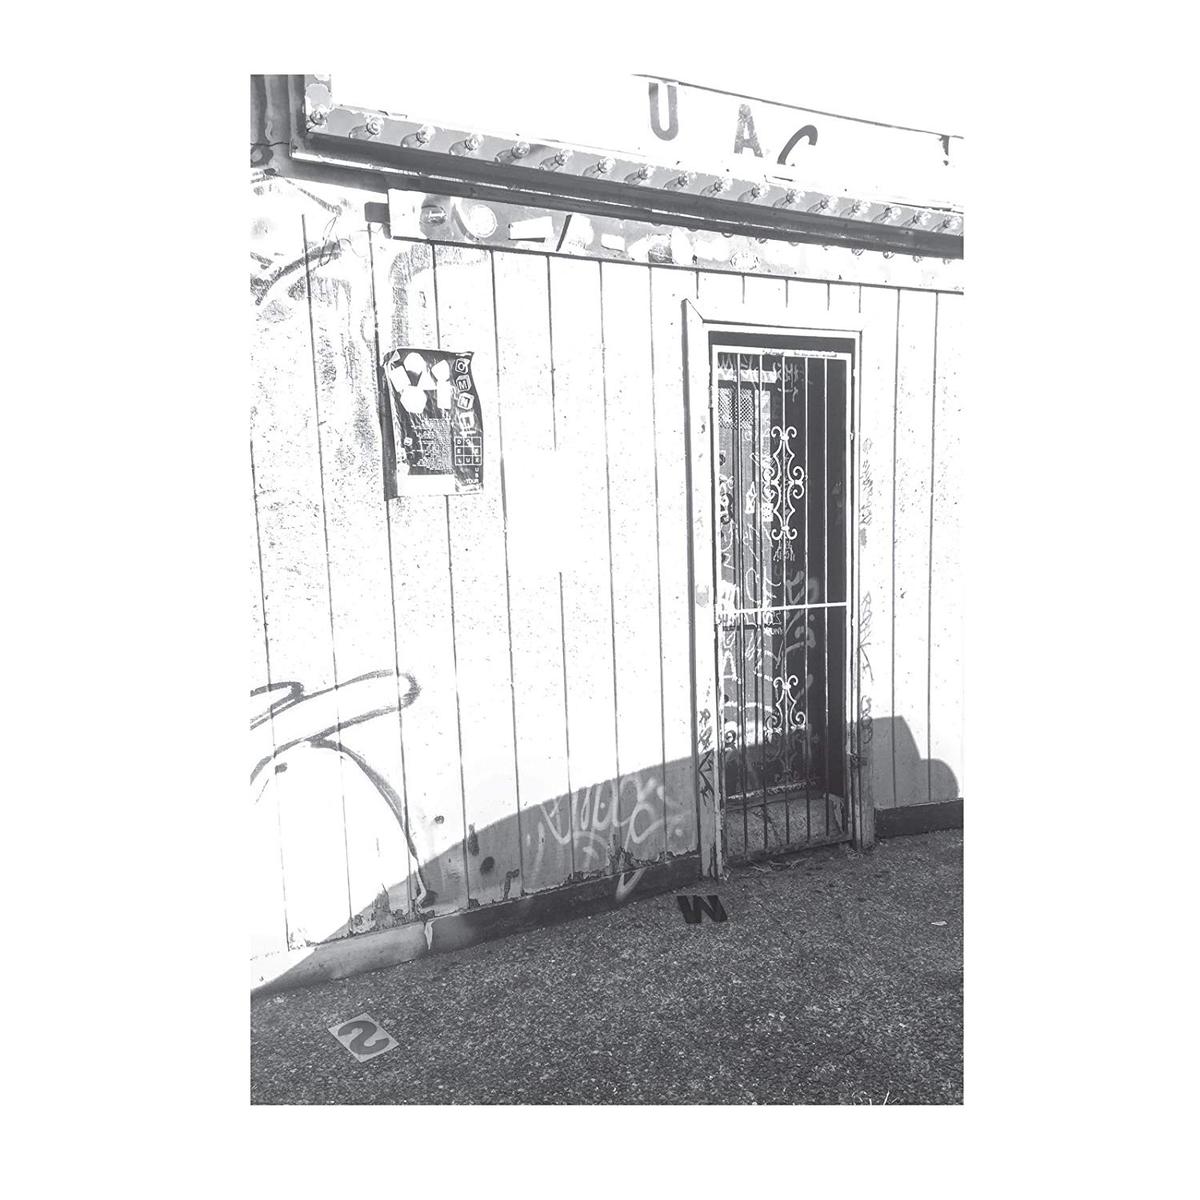 SUMAC "Before You I Appear" LP